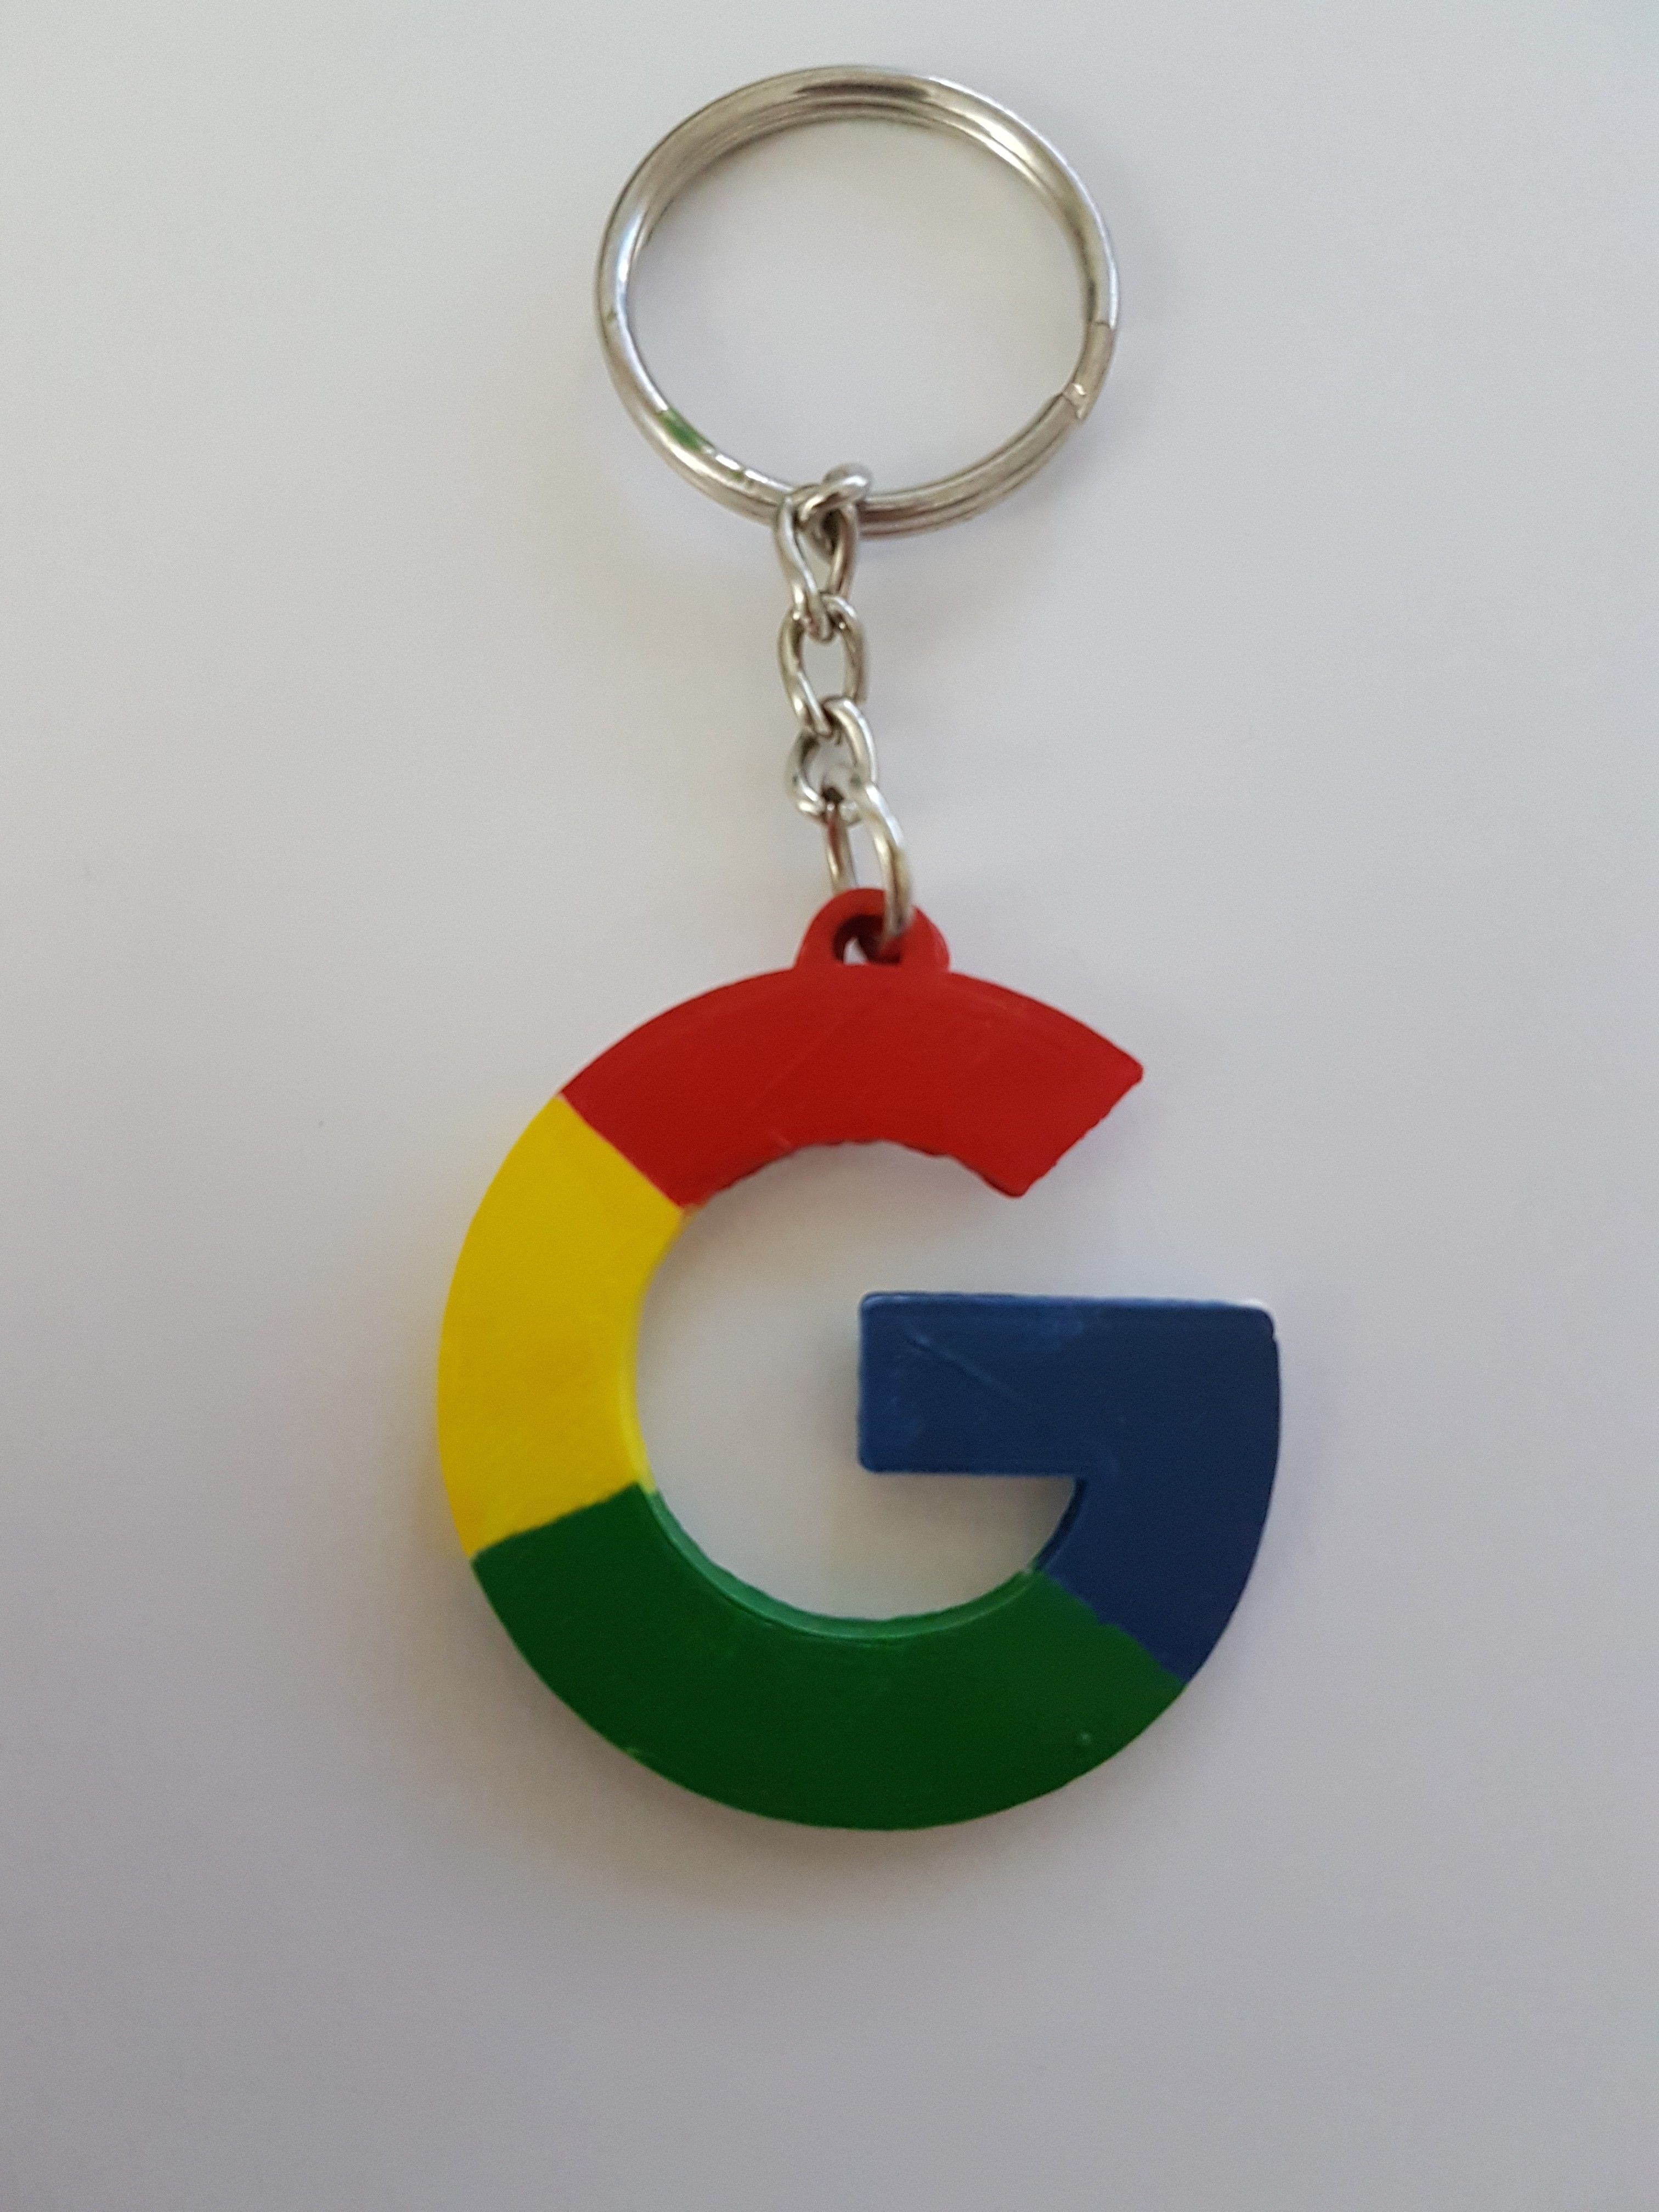 20181226_101227.jpg Free STL file Keychain google・Design to download and 3D print, f1l2o30